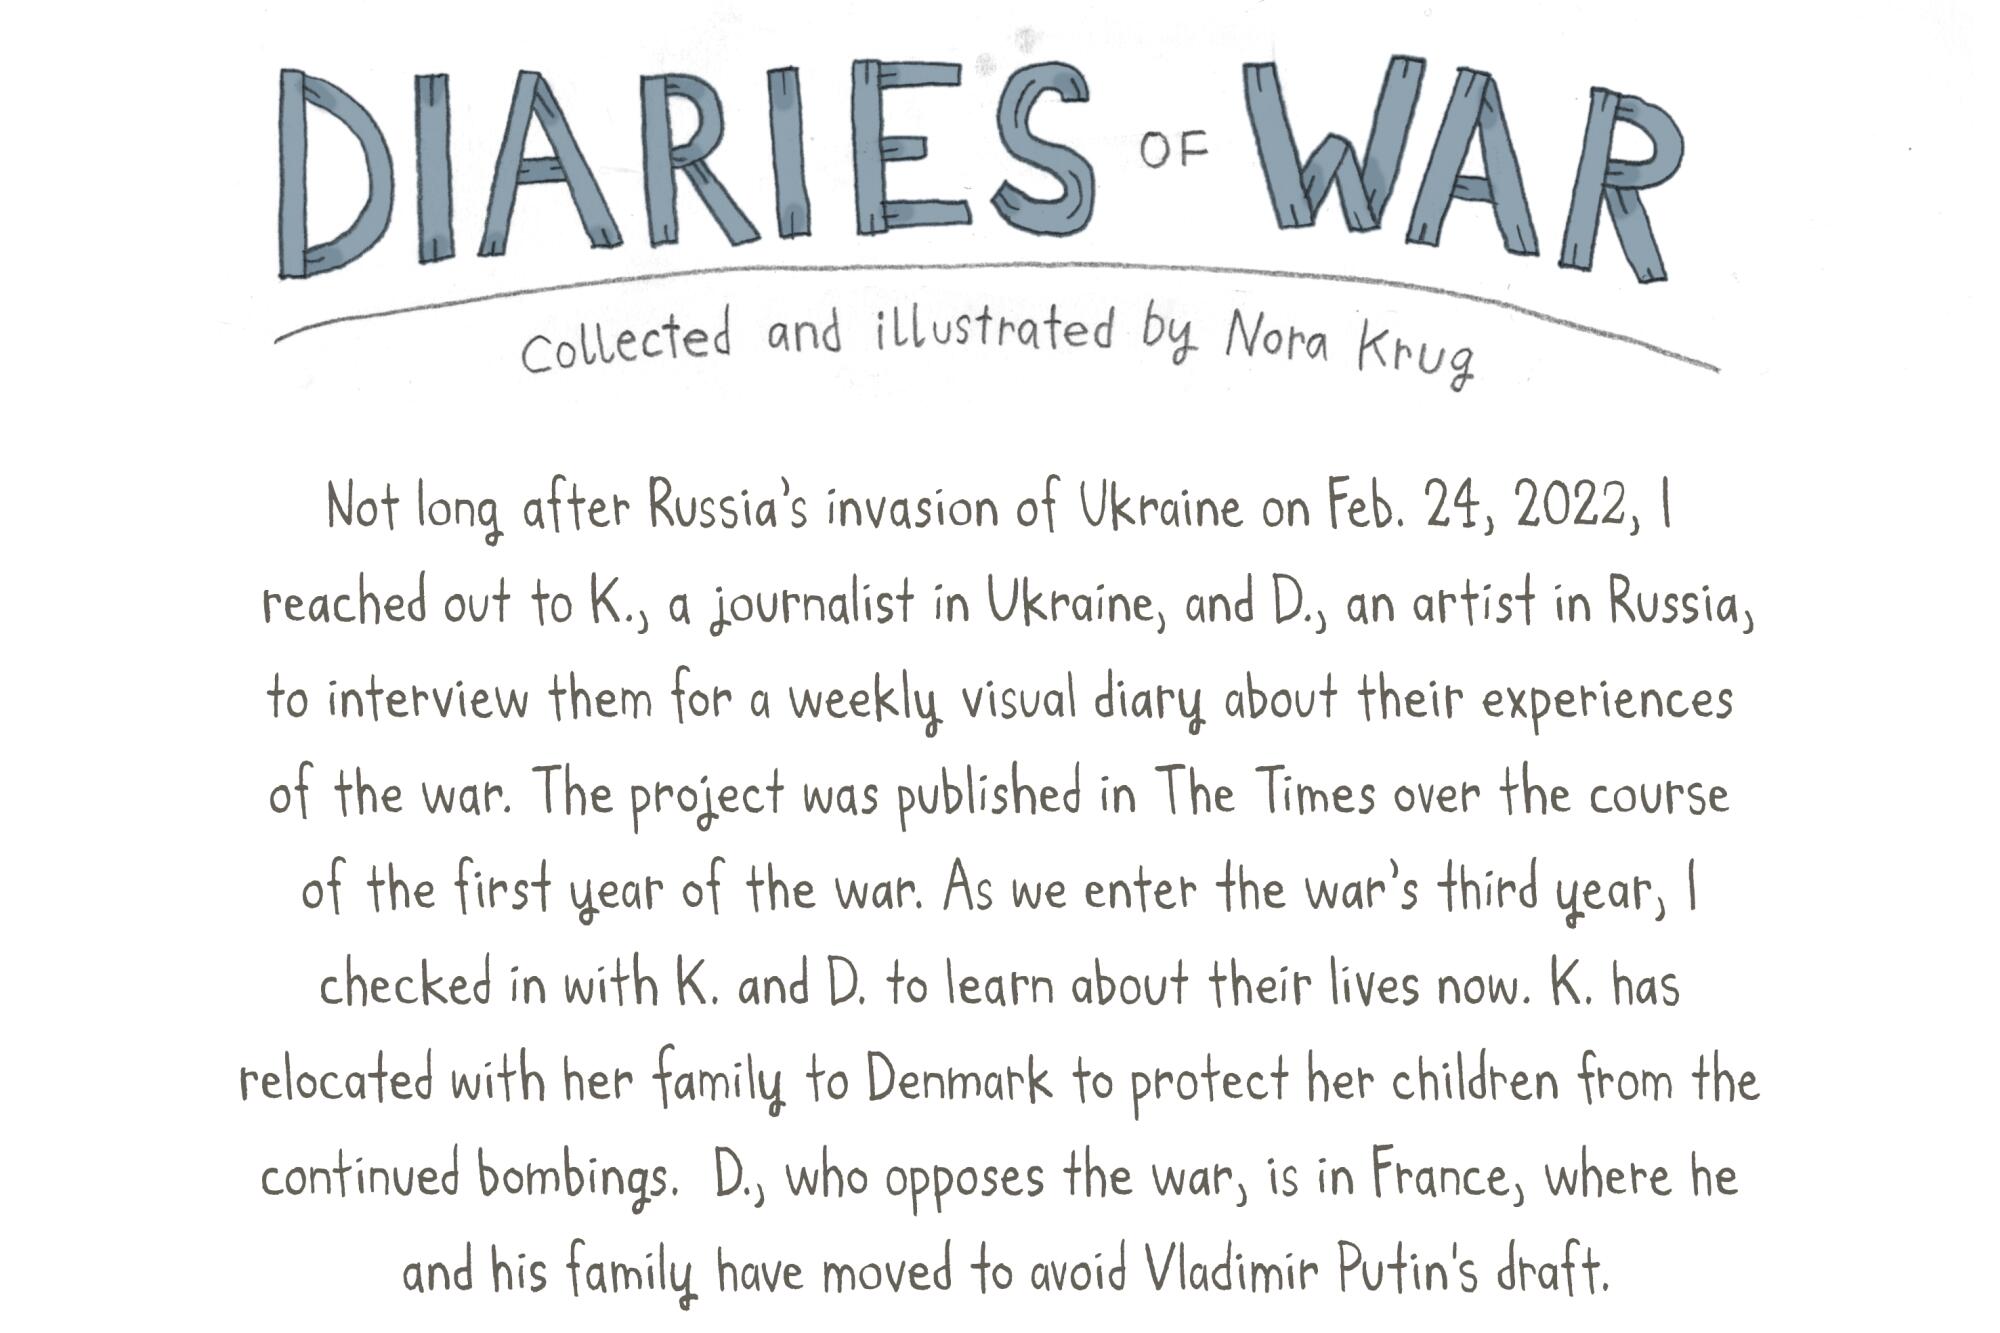 Diaries of War by Nora Krug - intro text and byline